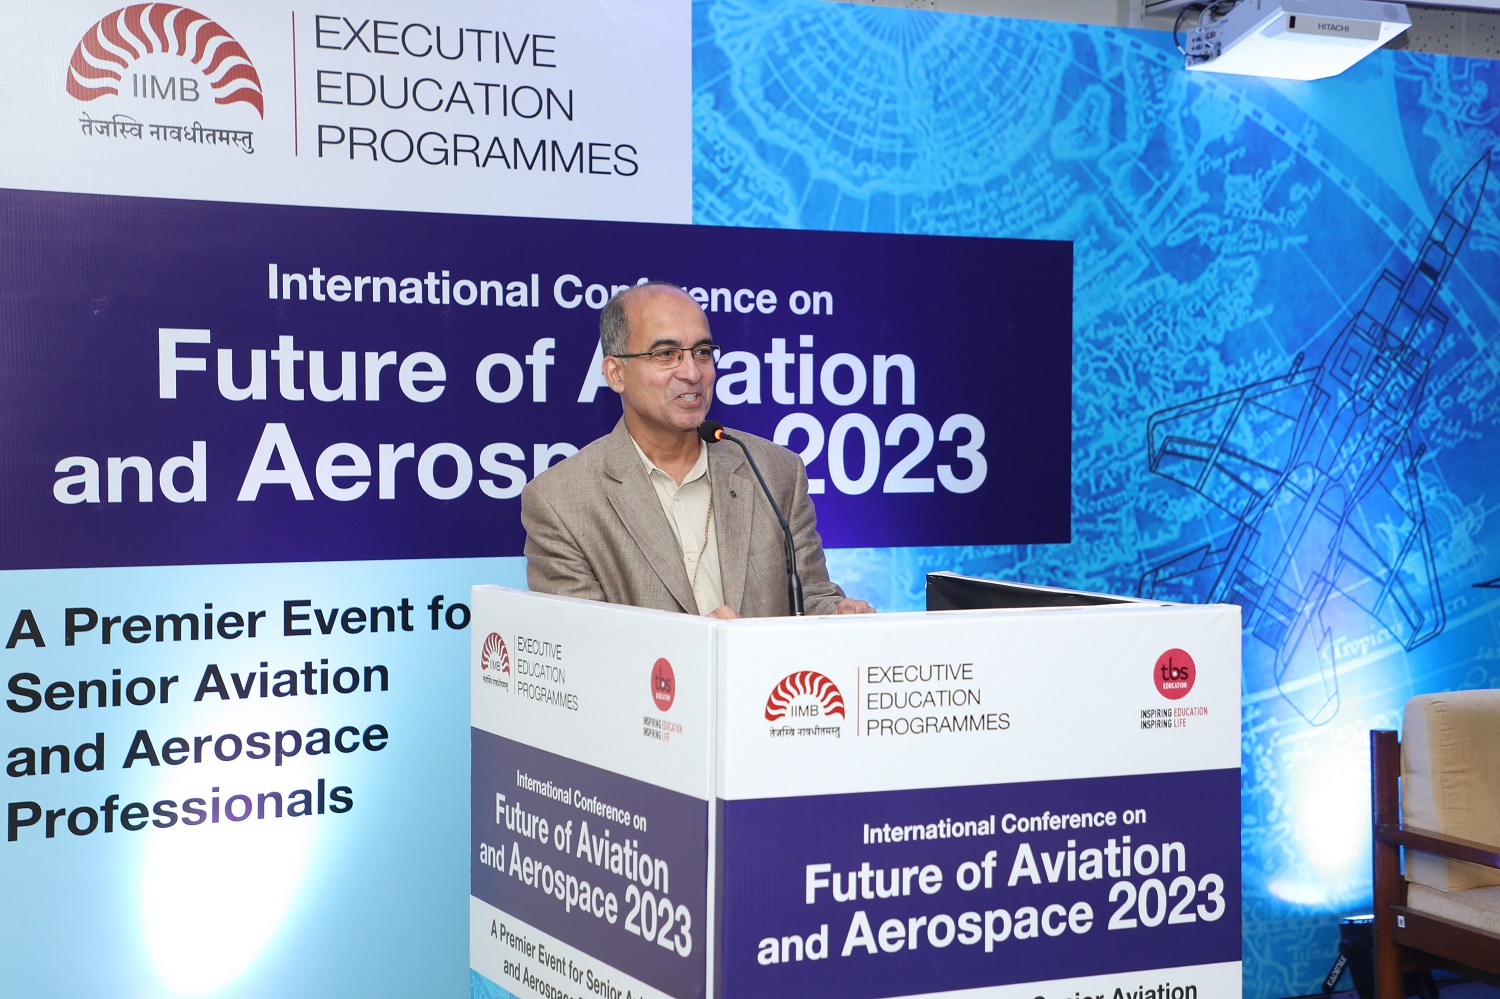 Mr. Rajeev Hundekar, Founder & CEO, Preusse Powertrain Innovations Pvt. Ltd., spoke on 'Future of Technology in Aerospace: Start-ups and Make in India Policy' at FOAA 2023.